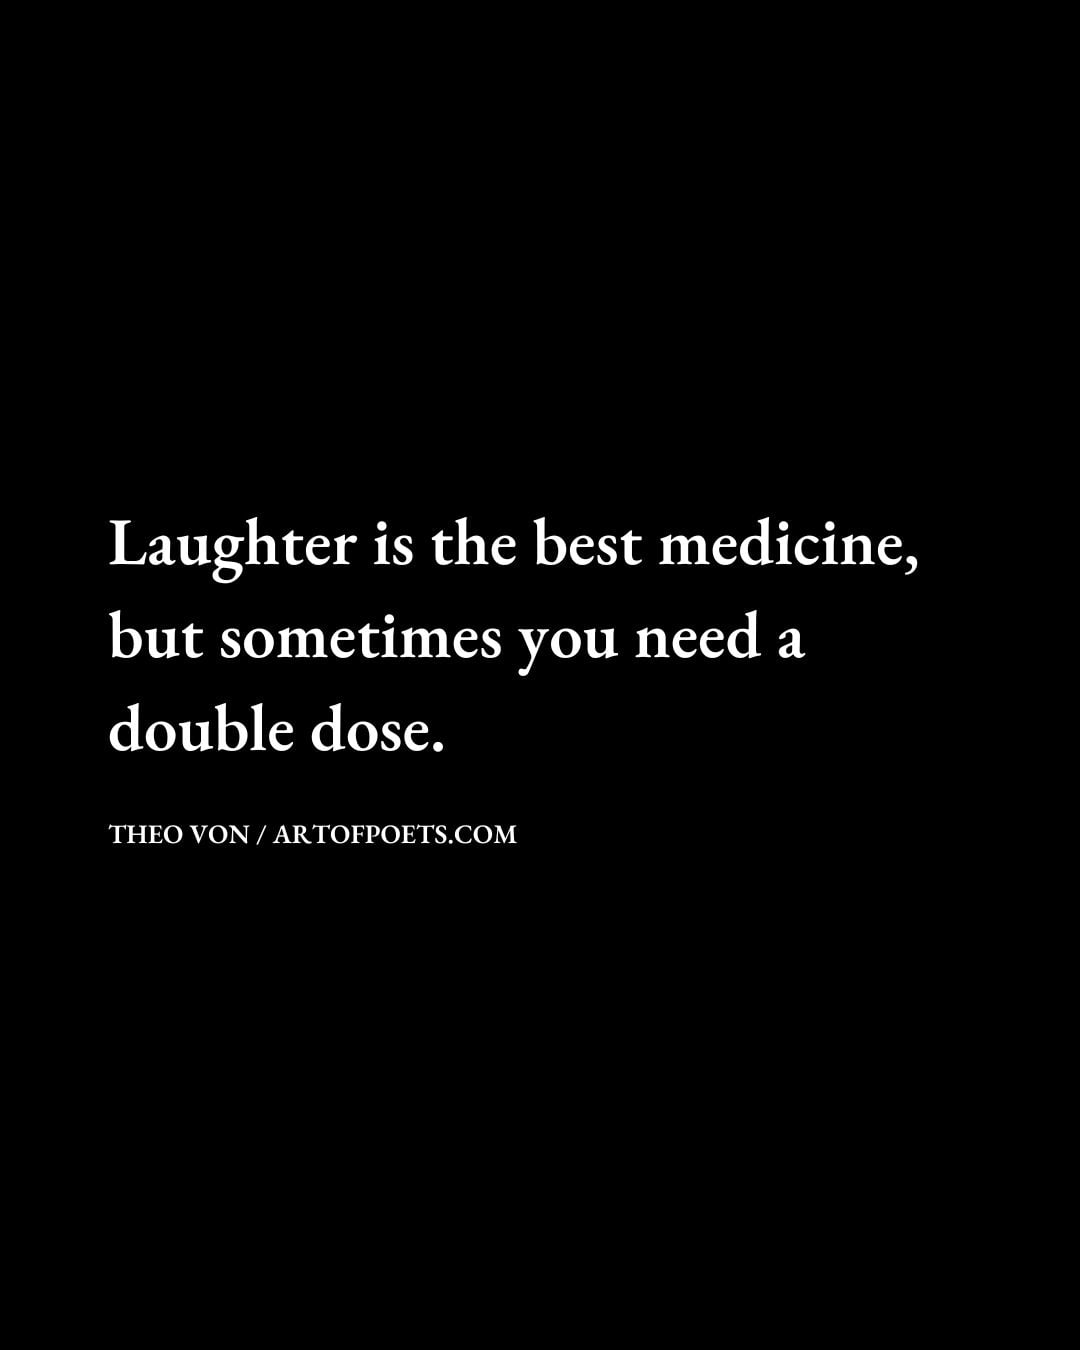 Laughter is the best medicine but sometimes you need a double dose